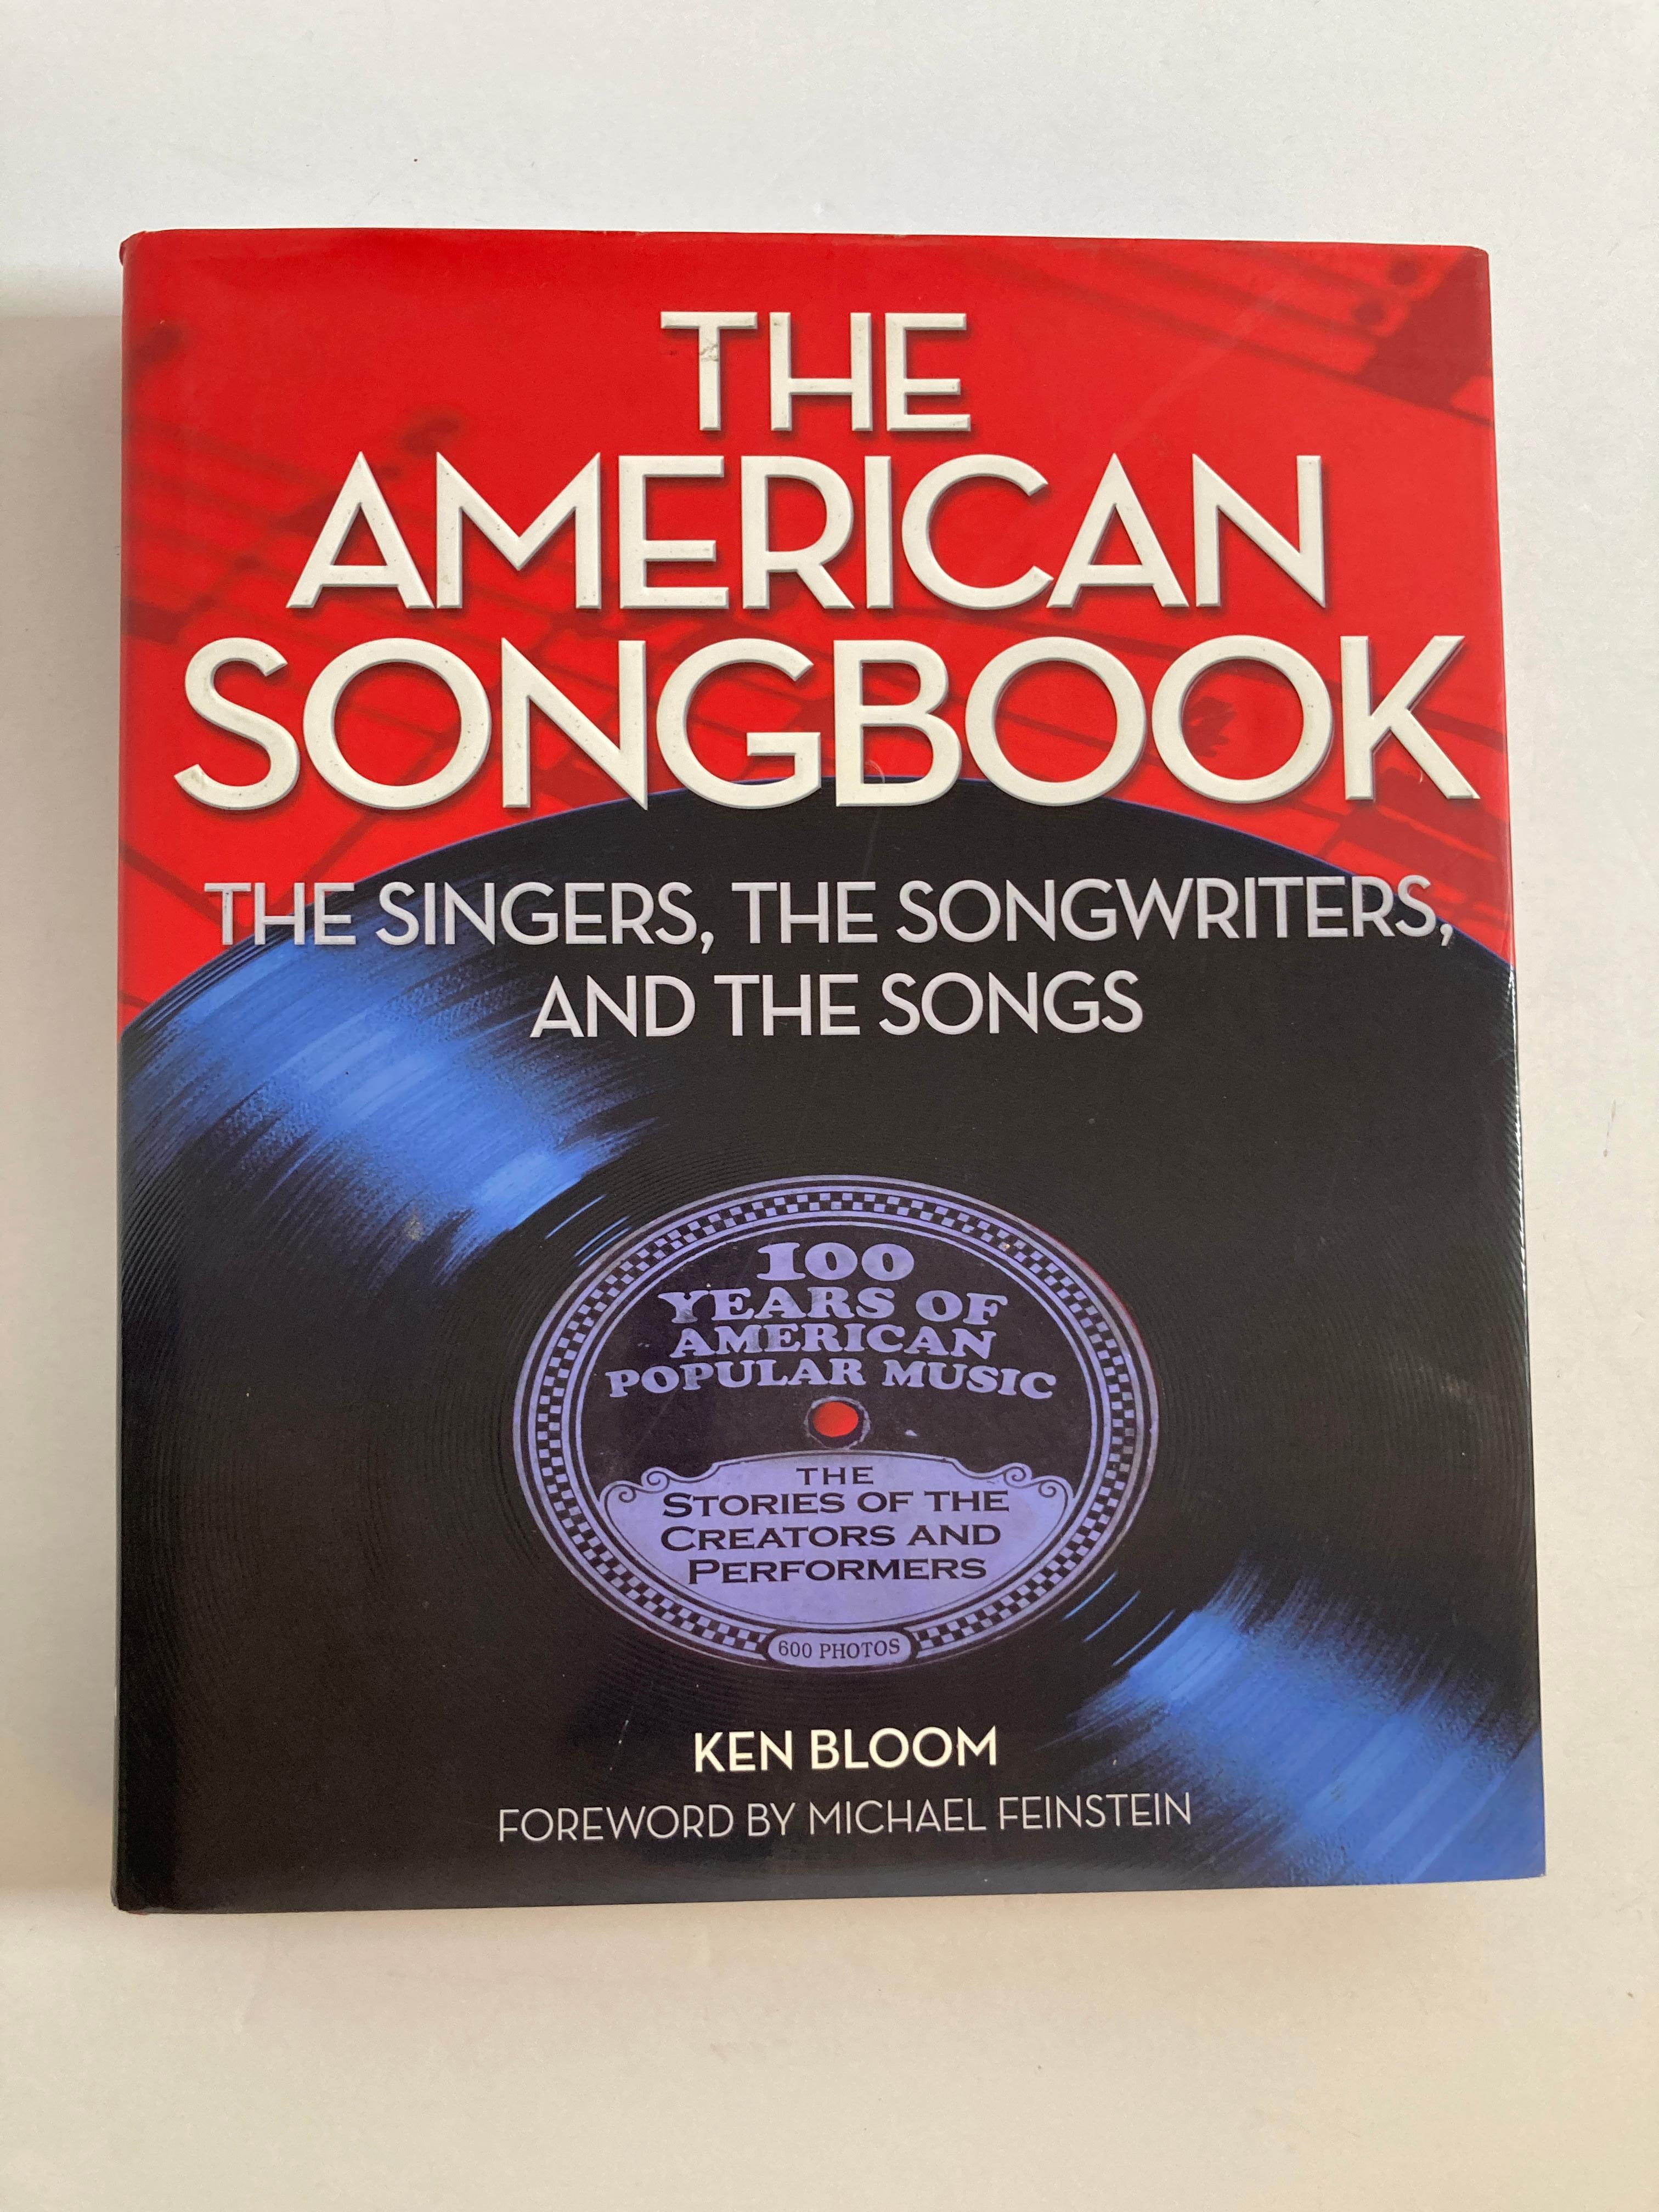 “The American Songbook: The Singers, Songwriters and The Songs” by Ken Bloom, book
Hardcover table book for music lover collector.
Synopsis:
Presented in the striking format of Ken Bloom’s successful Broadway Musicals, this rich visual history of